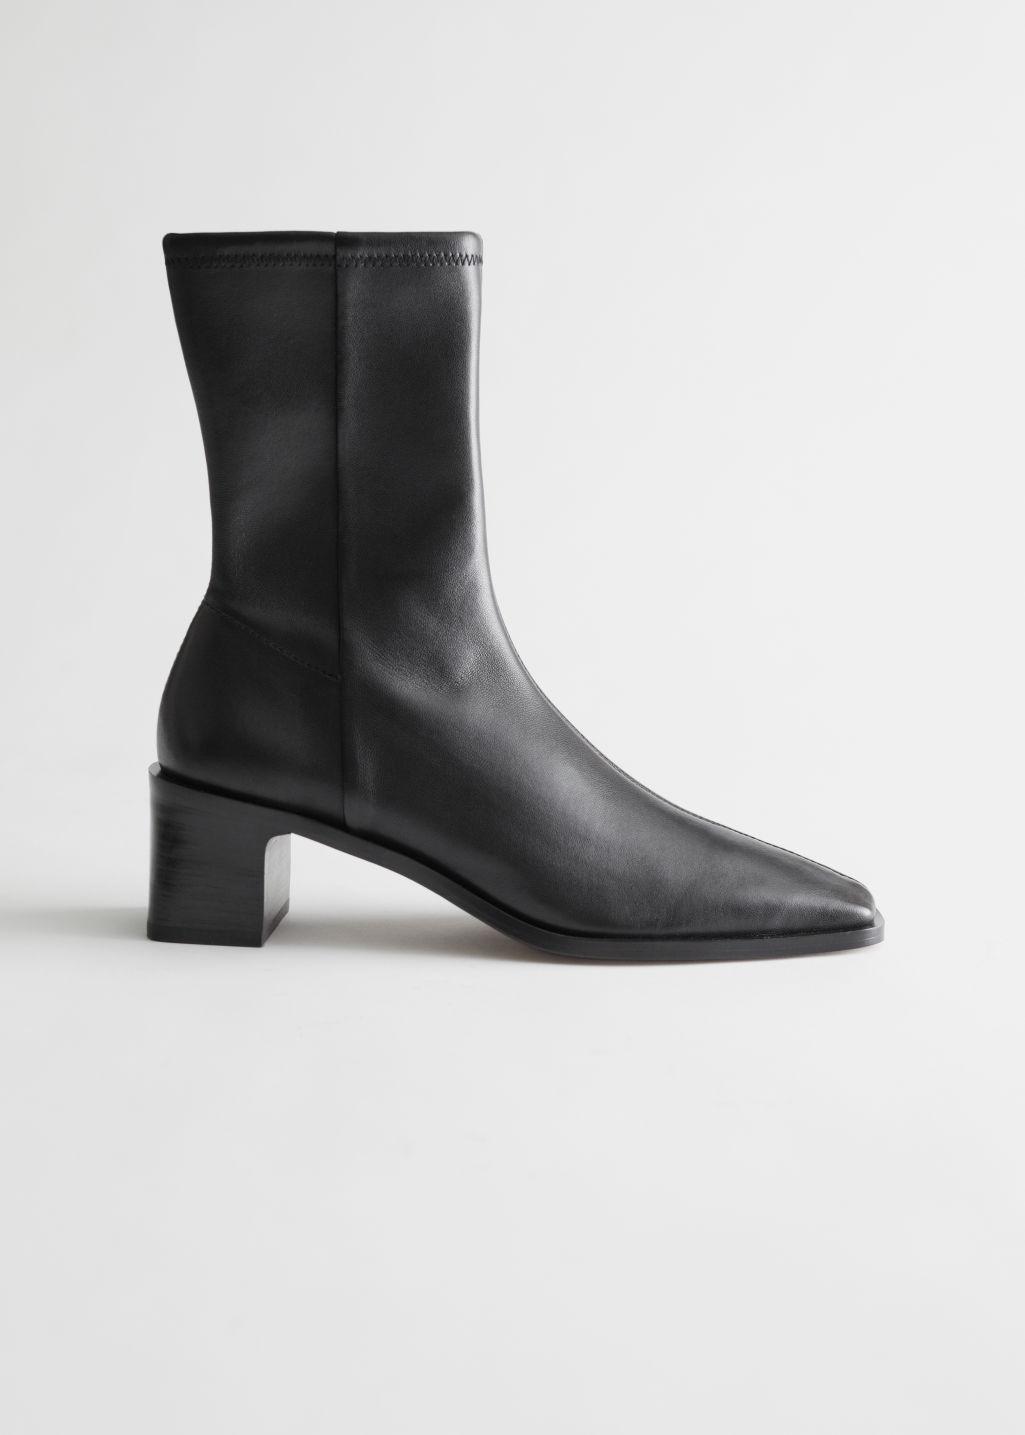 & Other Stories Squared Toe Leather Sock Boots in Black | Lyst